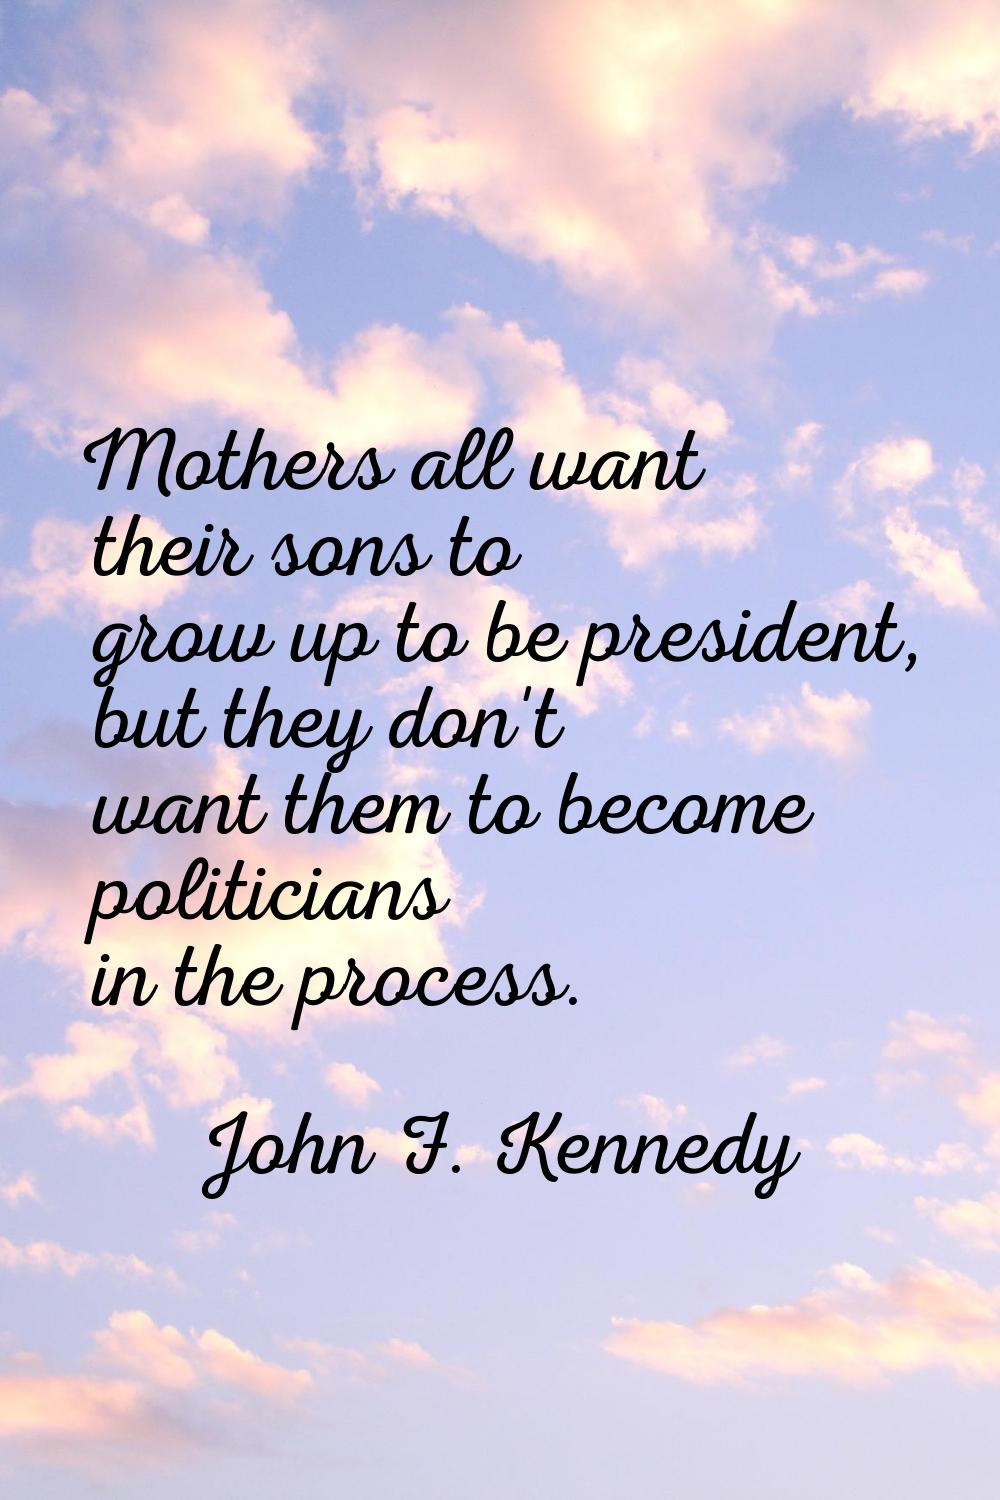 Mothers all want their sons to grow up to be president, but they don't want them to become politici